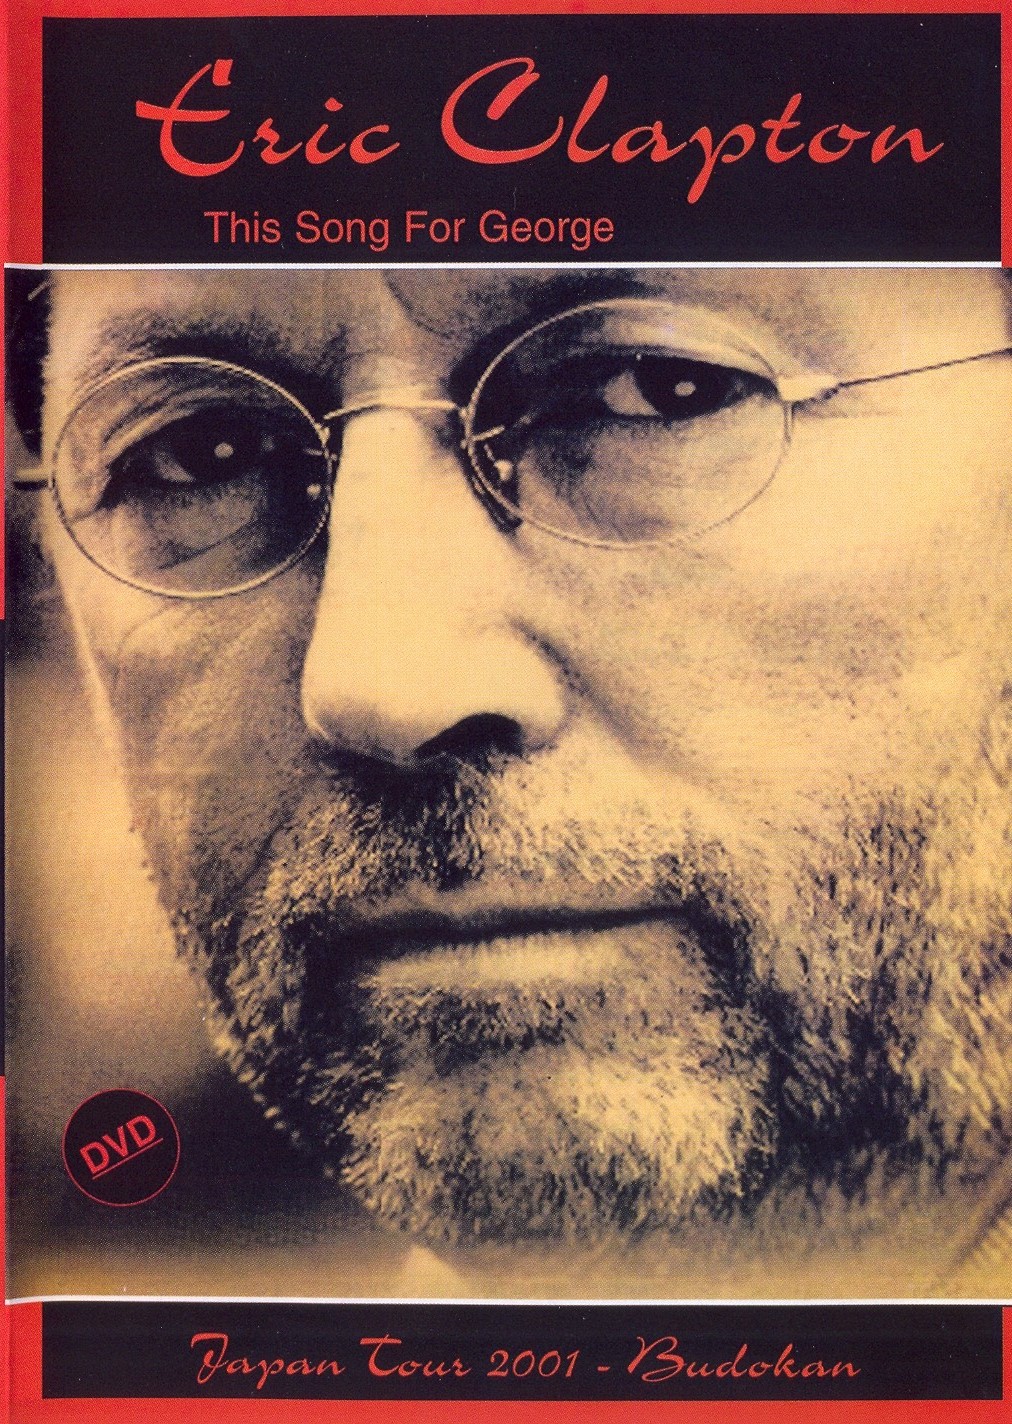 Eric Clapton - This Song For George - Japan Tour 2001 (DVD5)